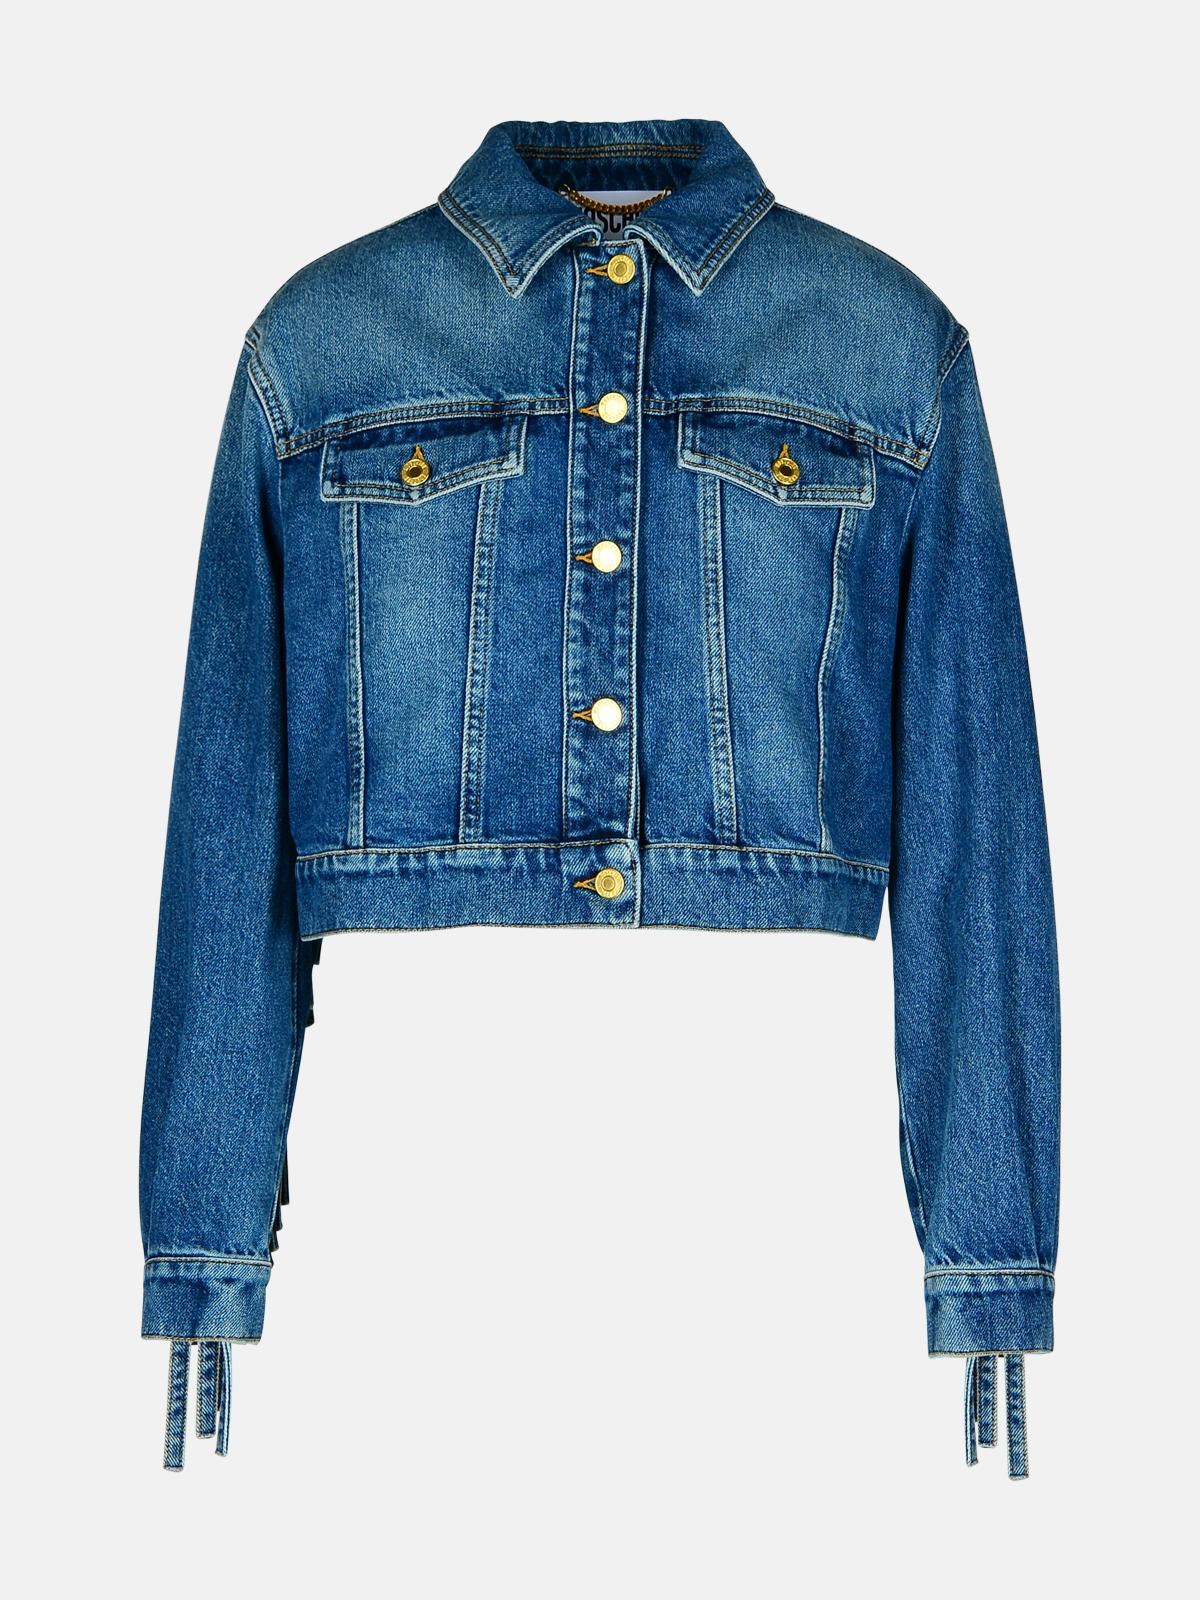 Moschino Blue Cotton Jeans Jacket In Black